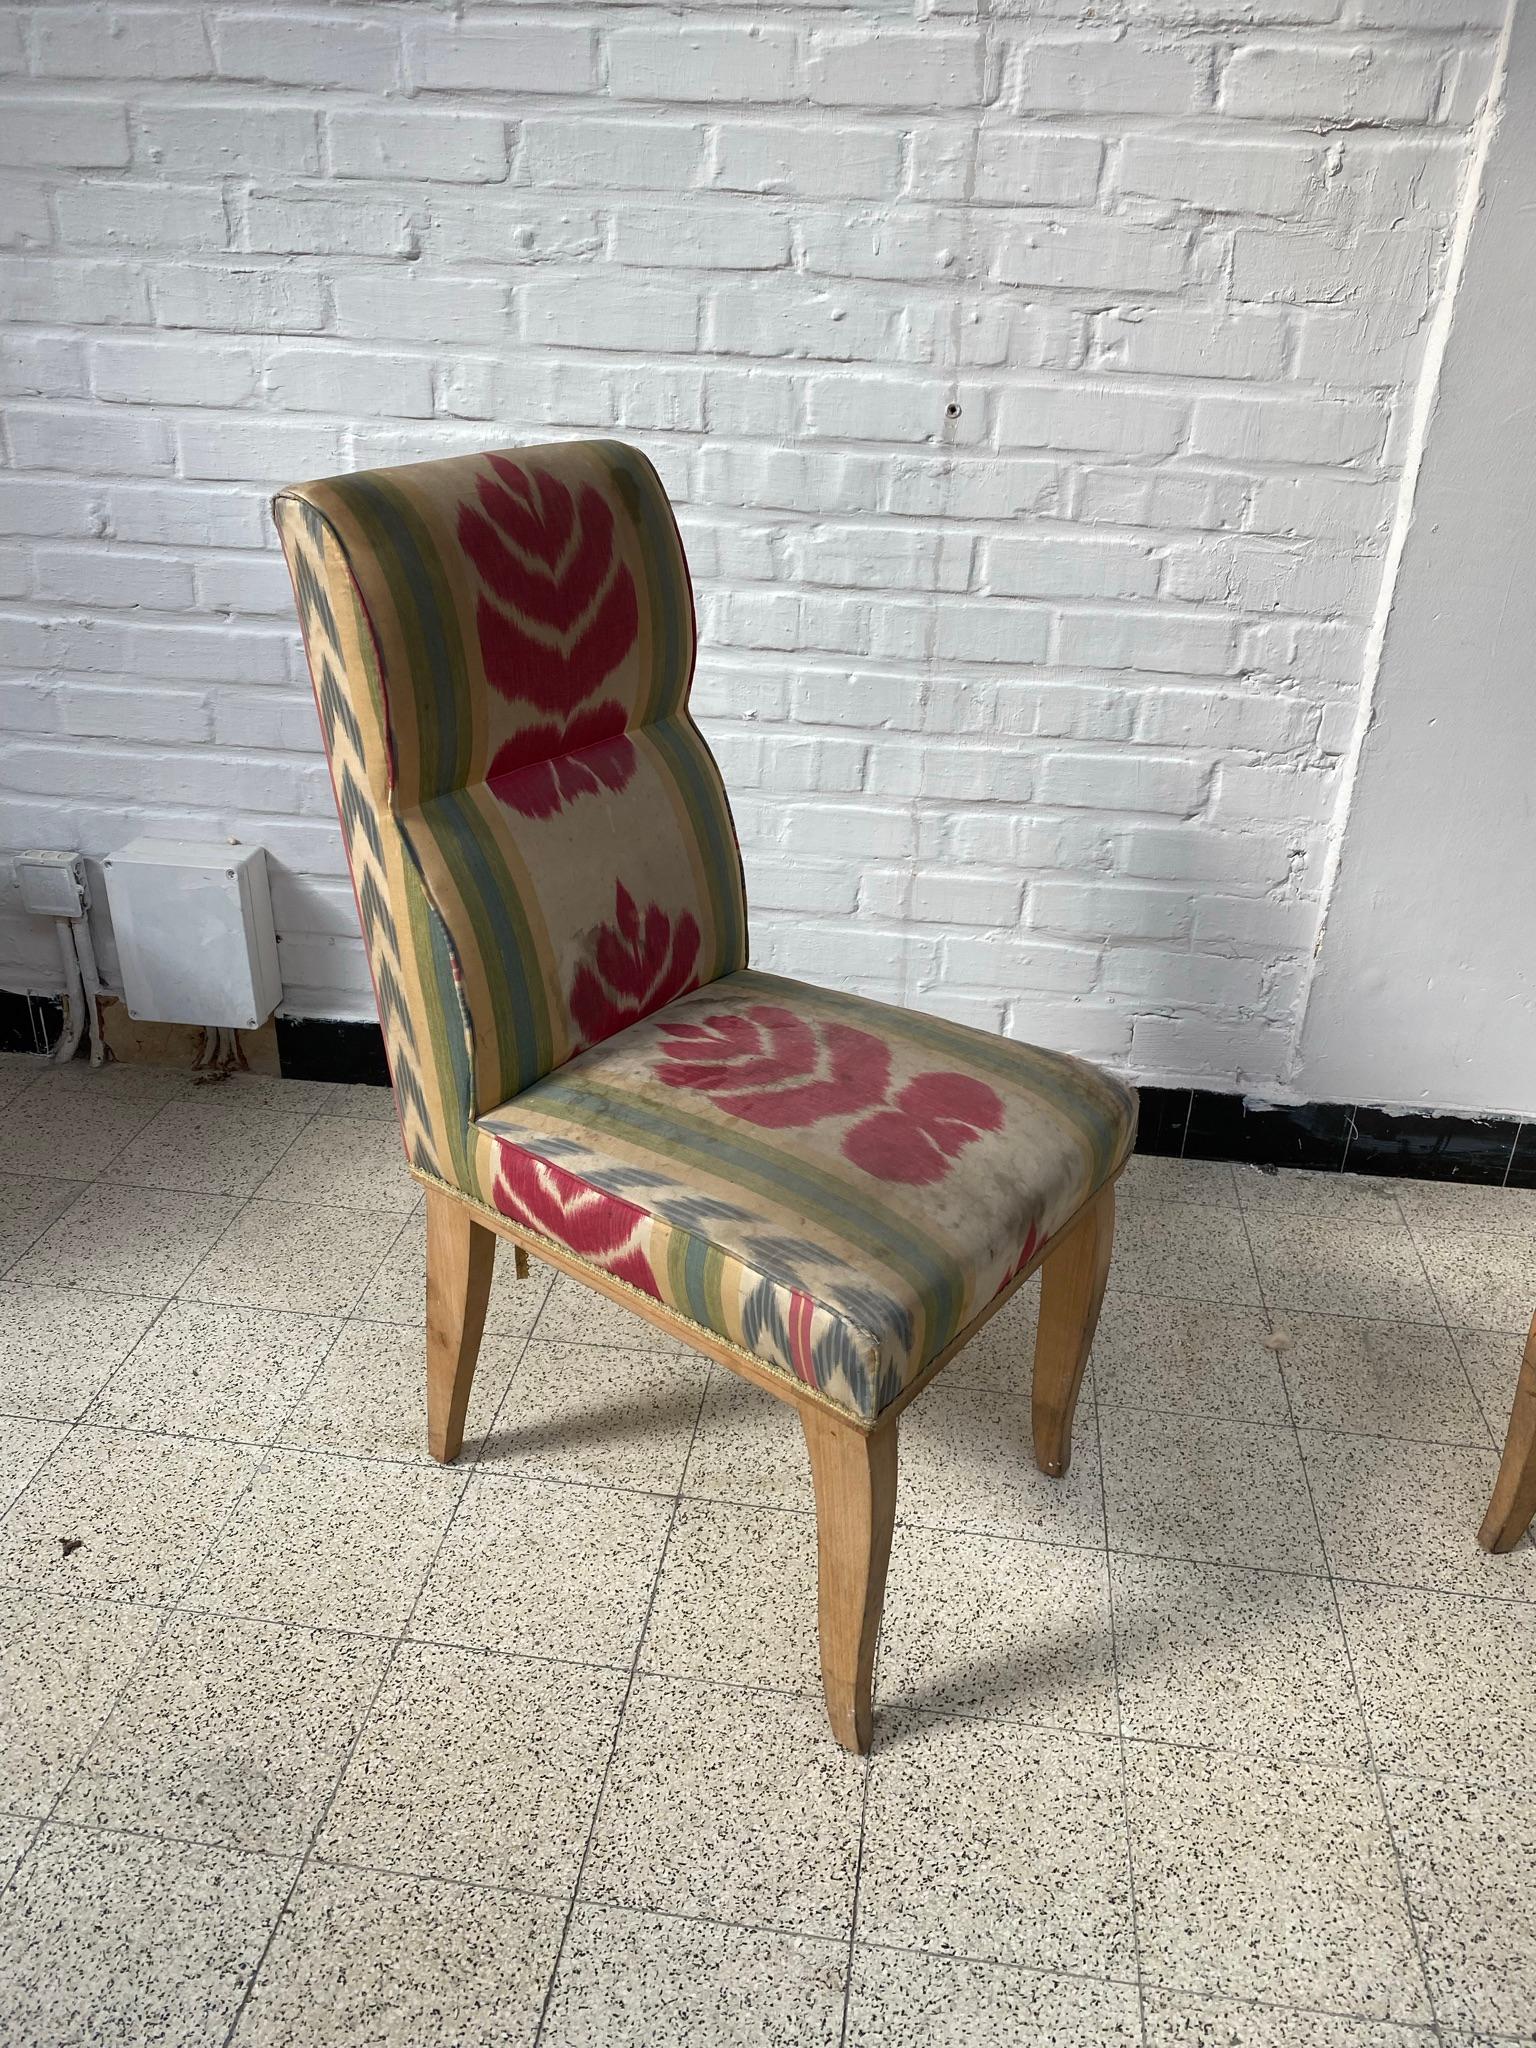 2 Art Deco chairs in the Style of René Prou, circa 1930
In sycamore and painted silk
to be restored.
  